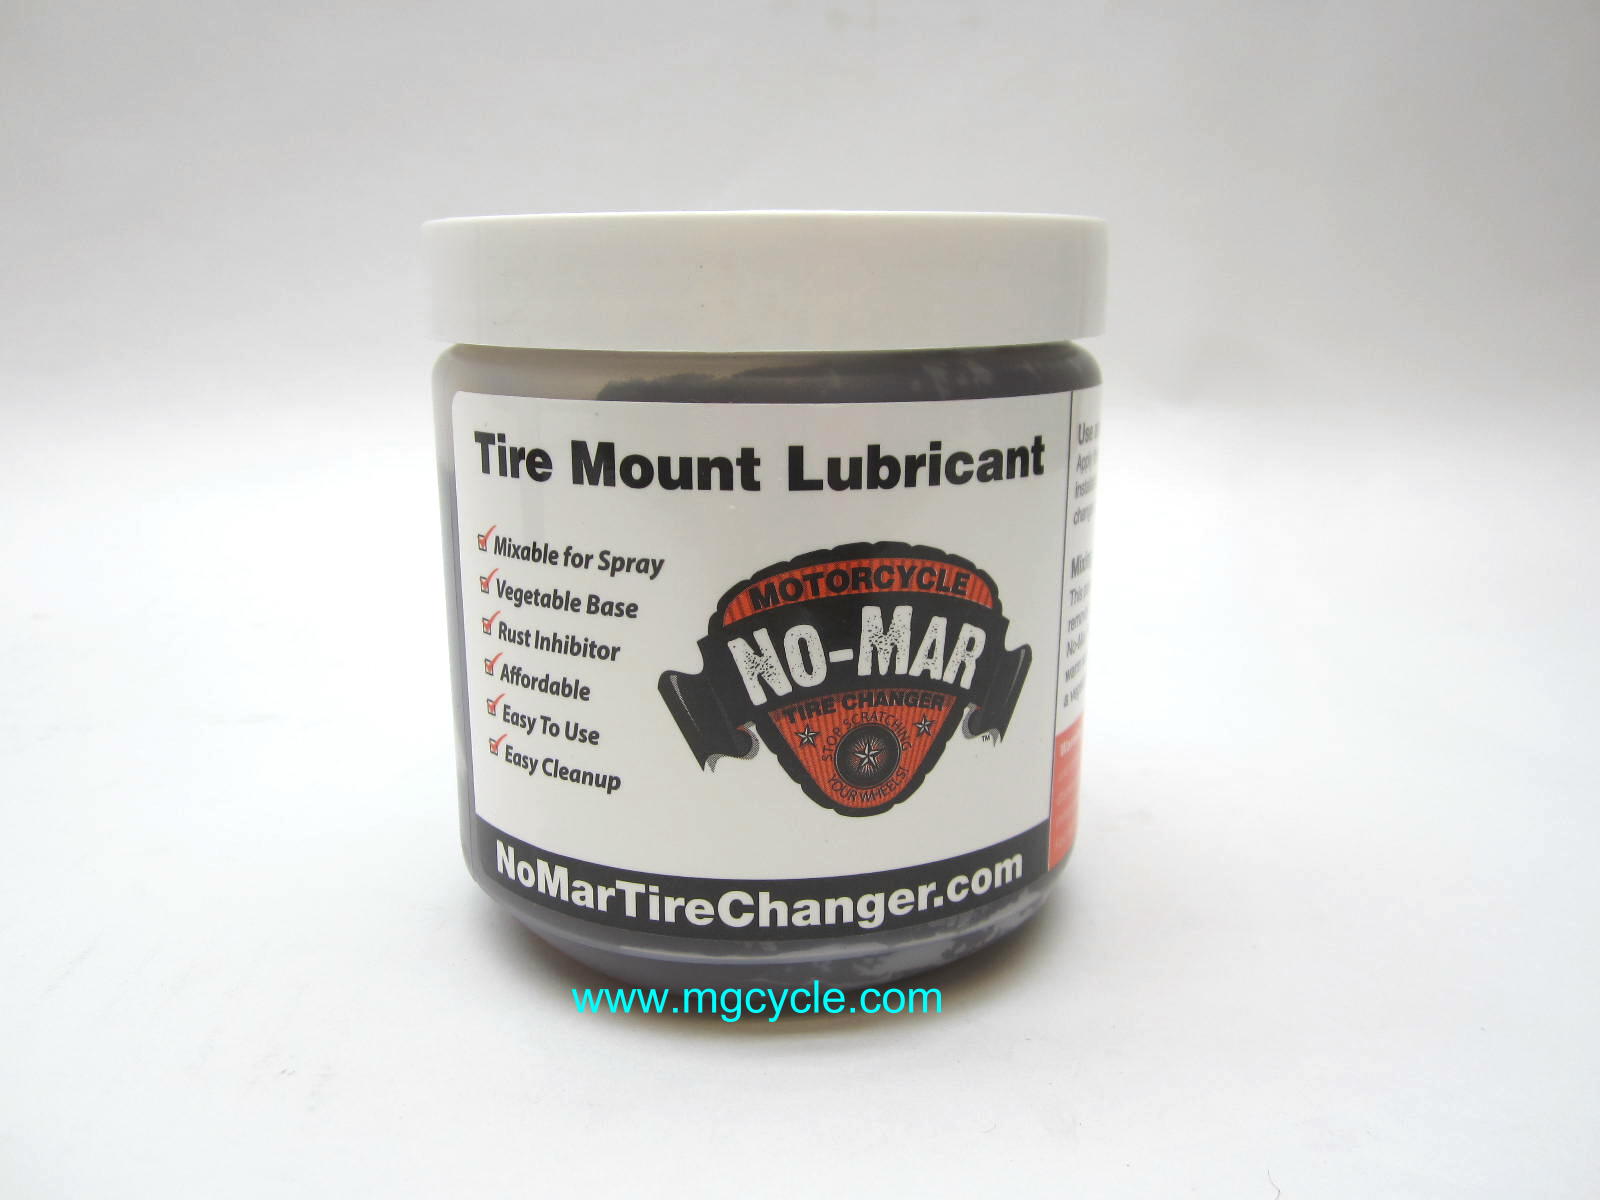 Tire mounting lubricant, 1 pint jar - Click Image to Close